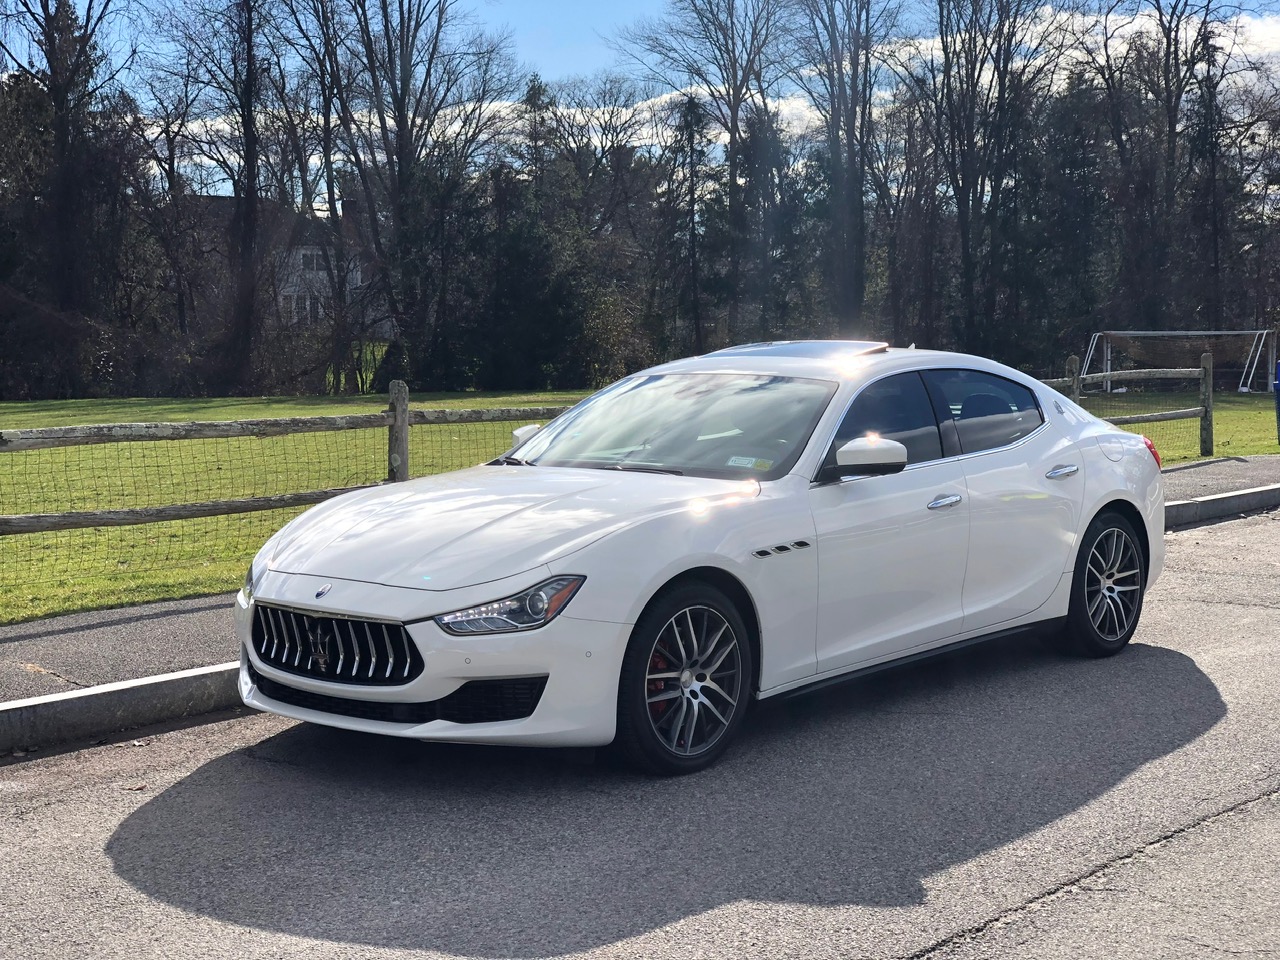 Maserati Ghibli for Sale (Test Drive at Home) - Kelley Blue Book